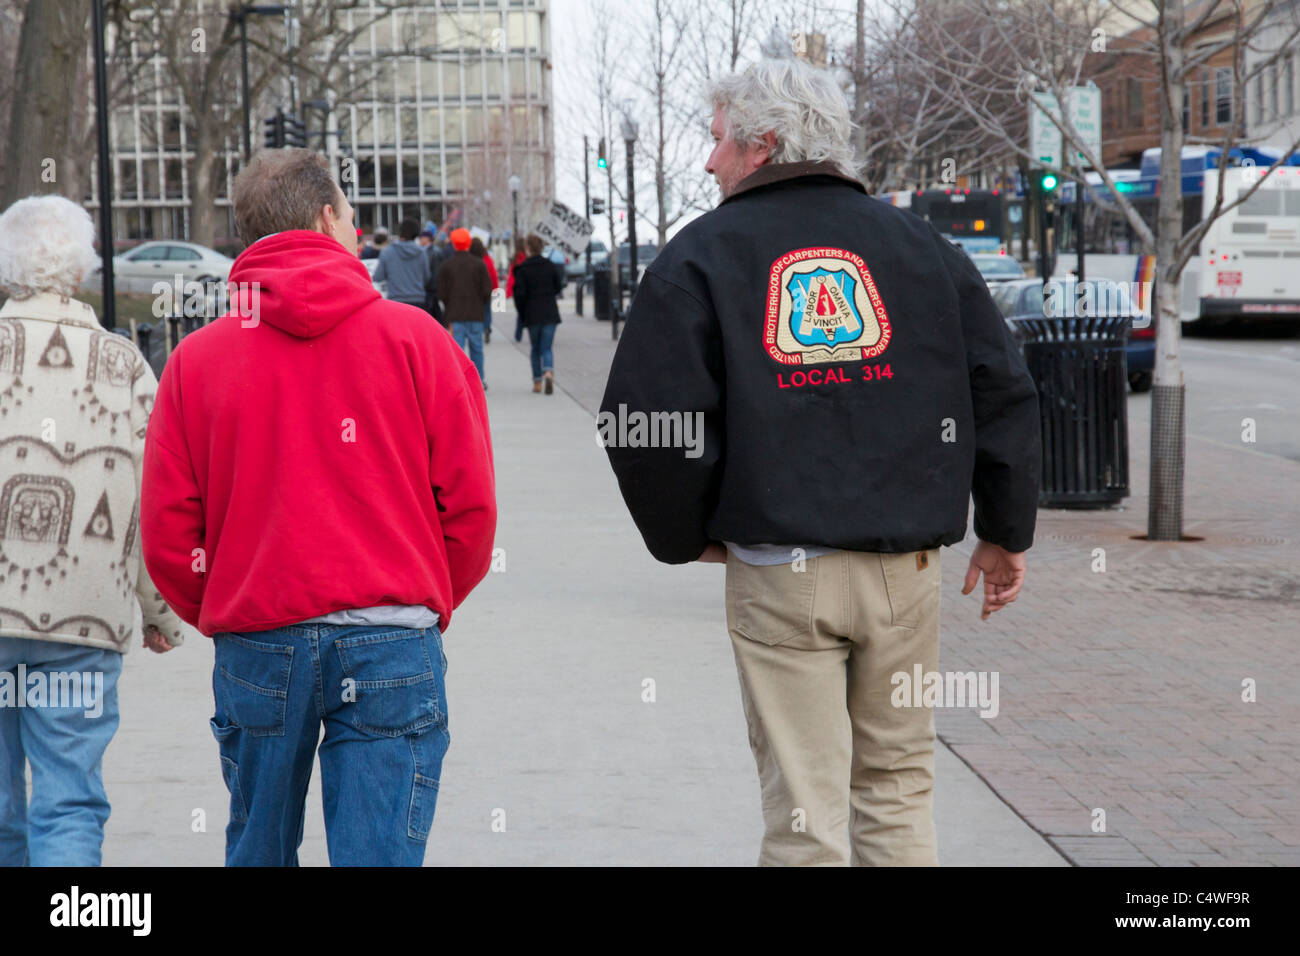 Labor protesters at Wisconsin state capitol. Carpenters' Union member jacket. Stock Photo